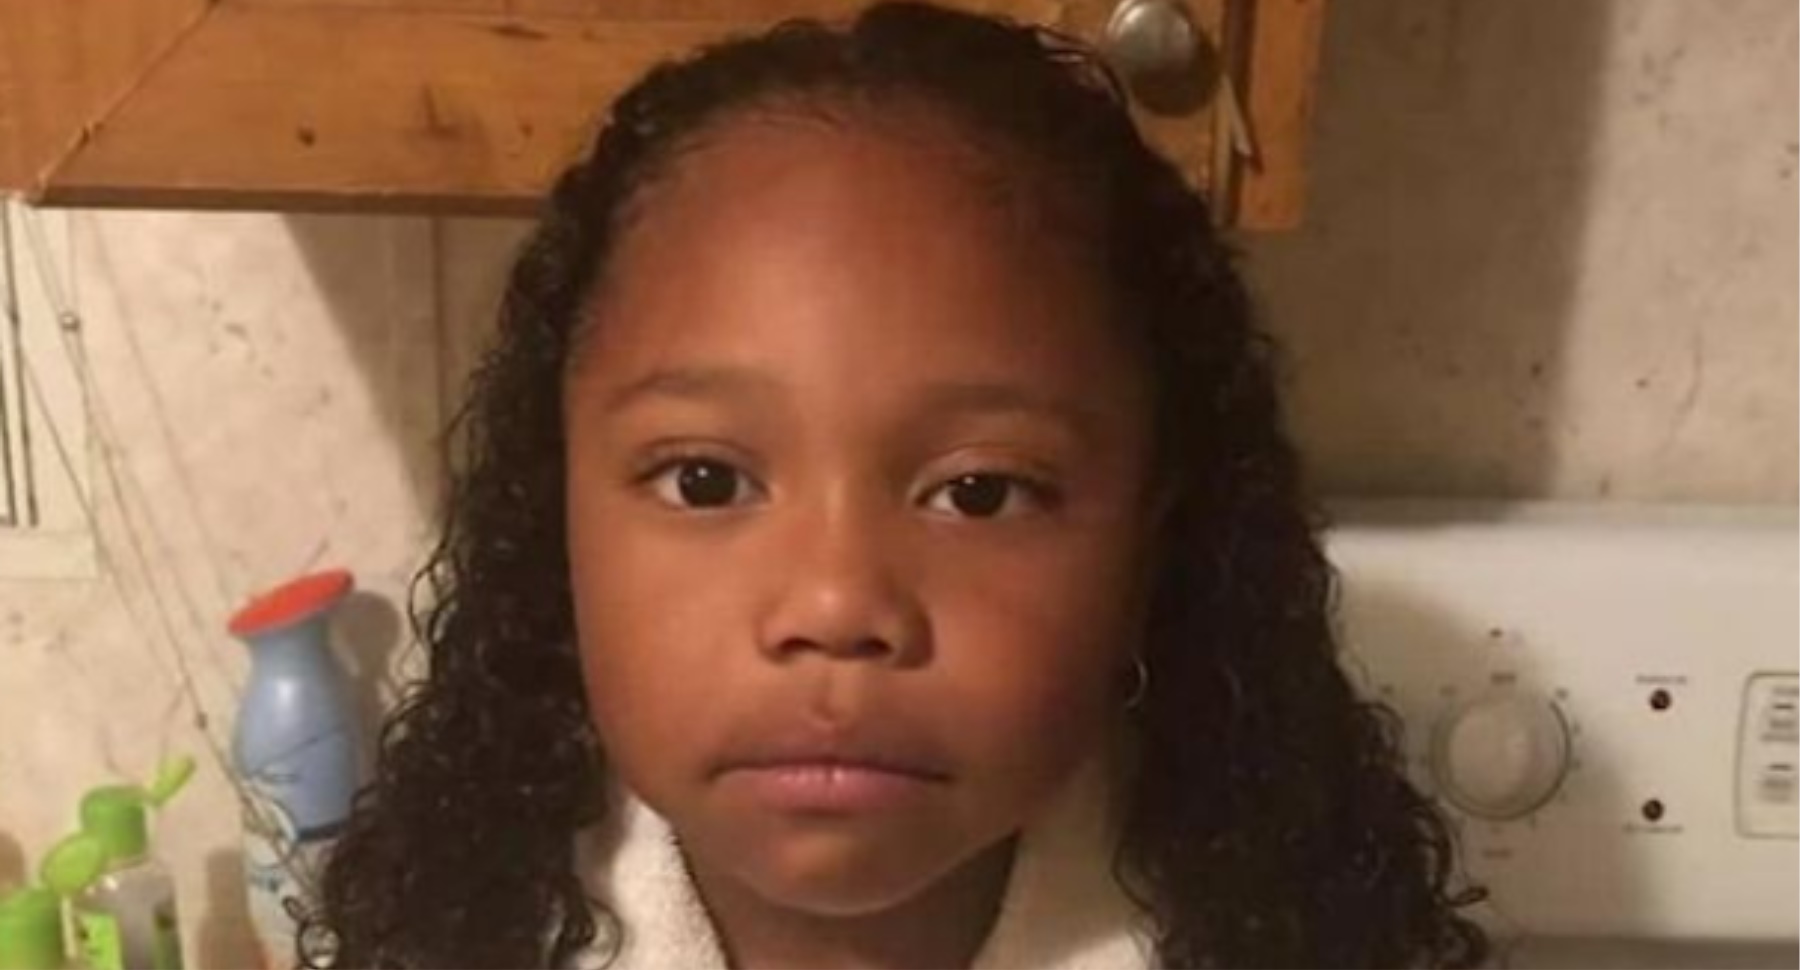 4-year-old Black boy told to cut his long hair or wear a dress on his first day in school